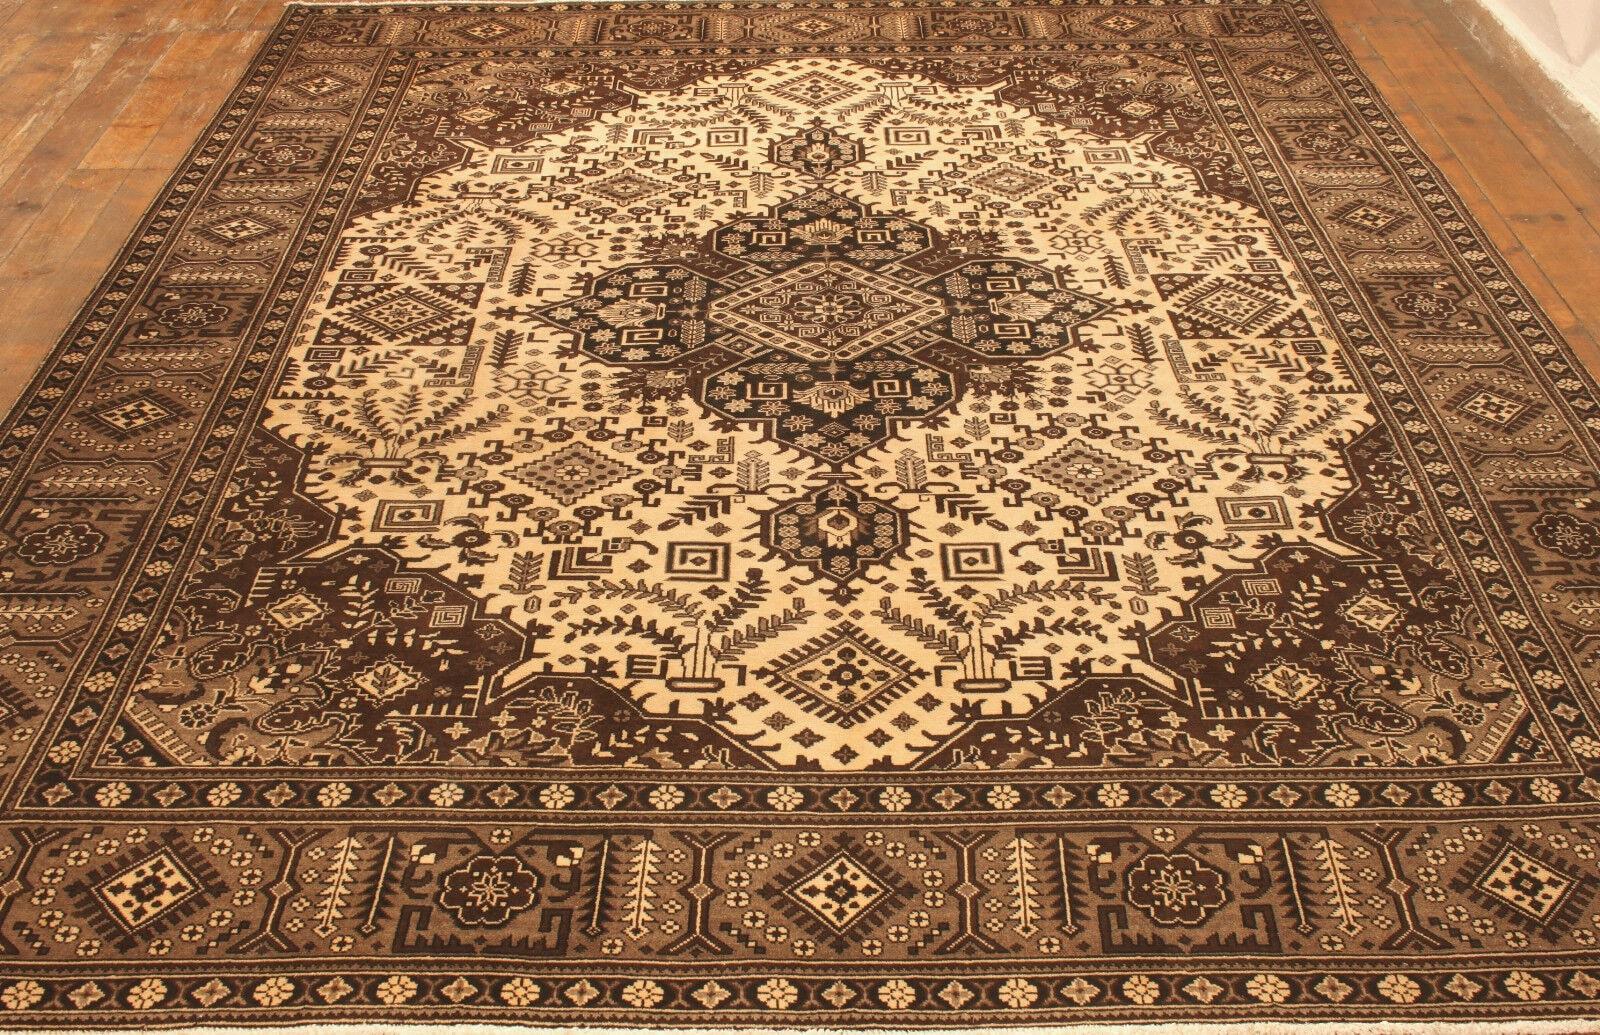 Handmade Vintage Persian Style Tabriz Rug (10’ x 12.8’ / 307cm x 393cm)

Step into the world of Persian elegance with our Handmade Vintage Persian Style Tabriz Rug. Crafted in the 1970s, this exquisite woolen rug measures 10’ x 12.8’ (307cm x